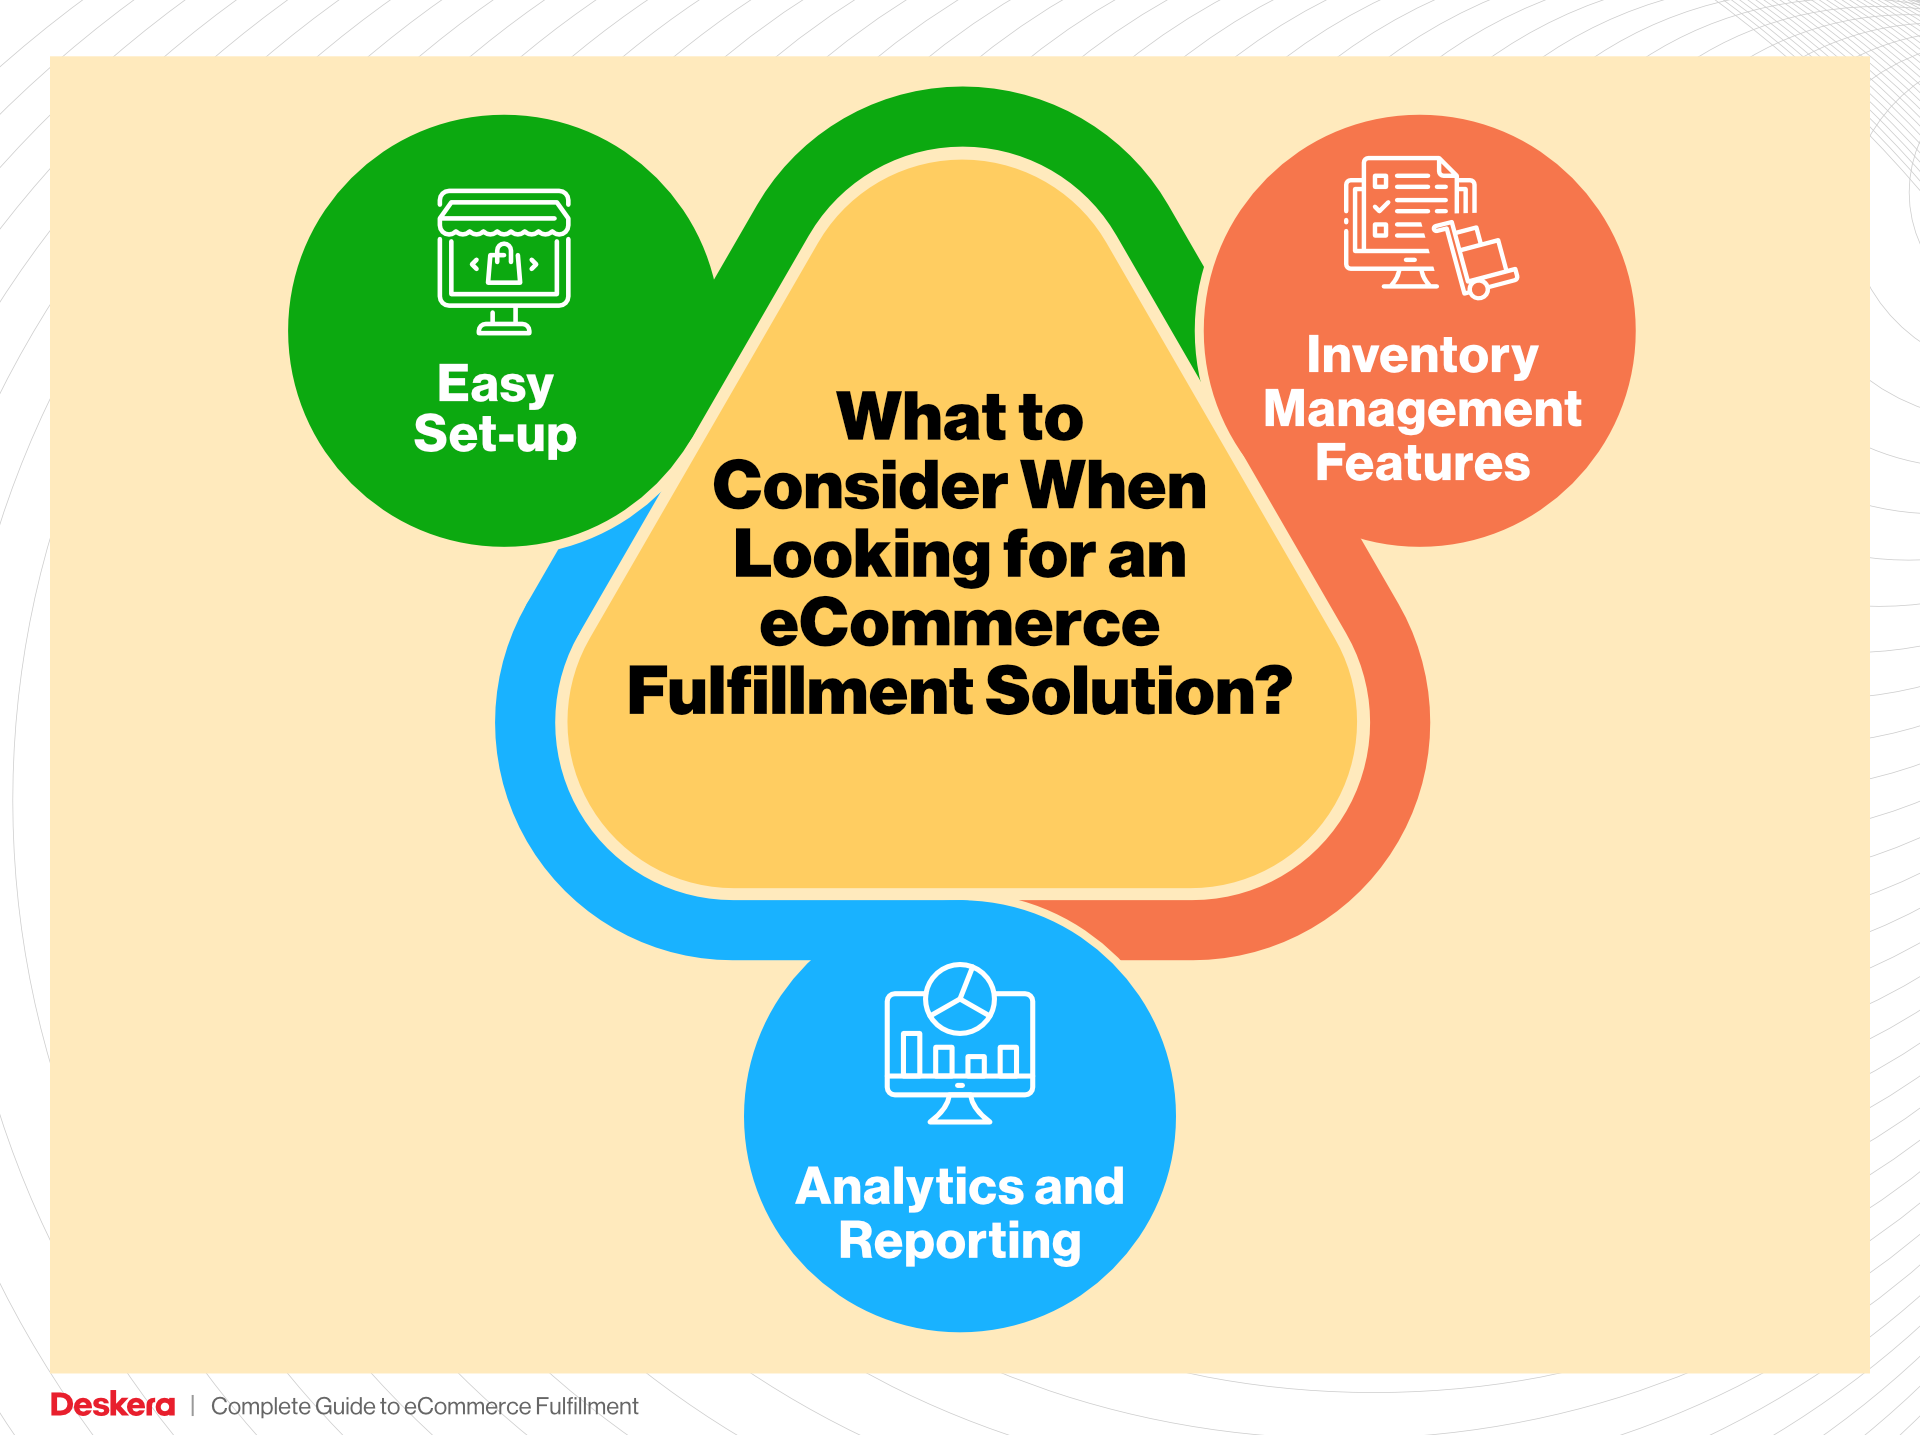 What to Consider When Looking for eCommerce Fulfillment Solutions?